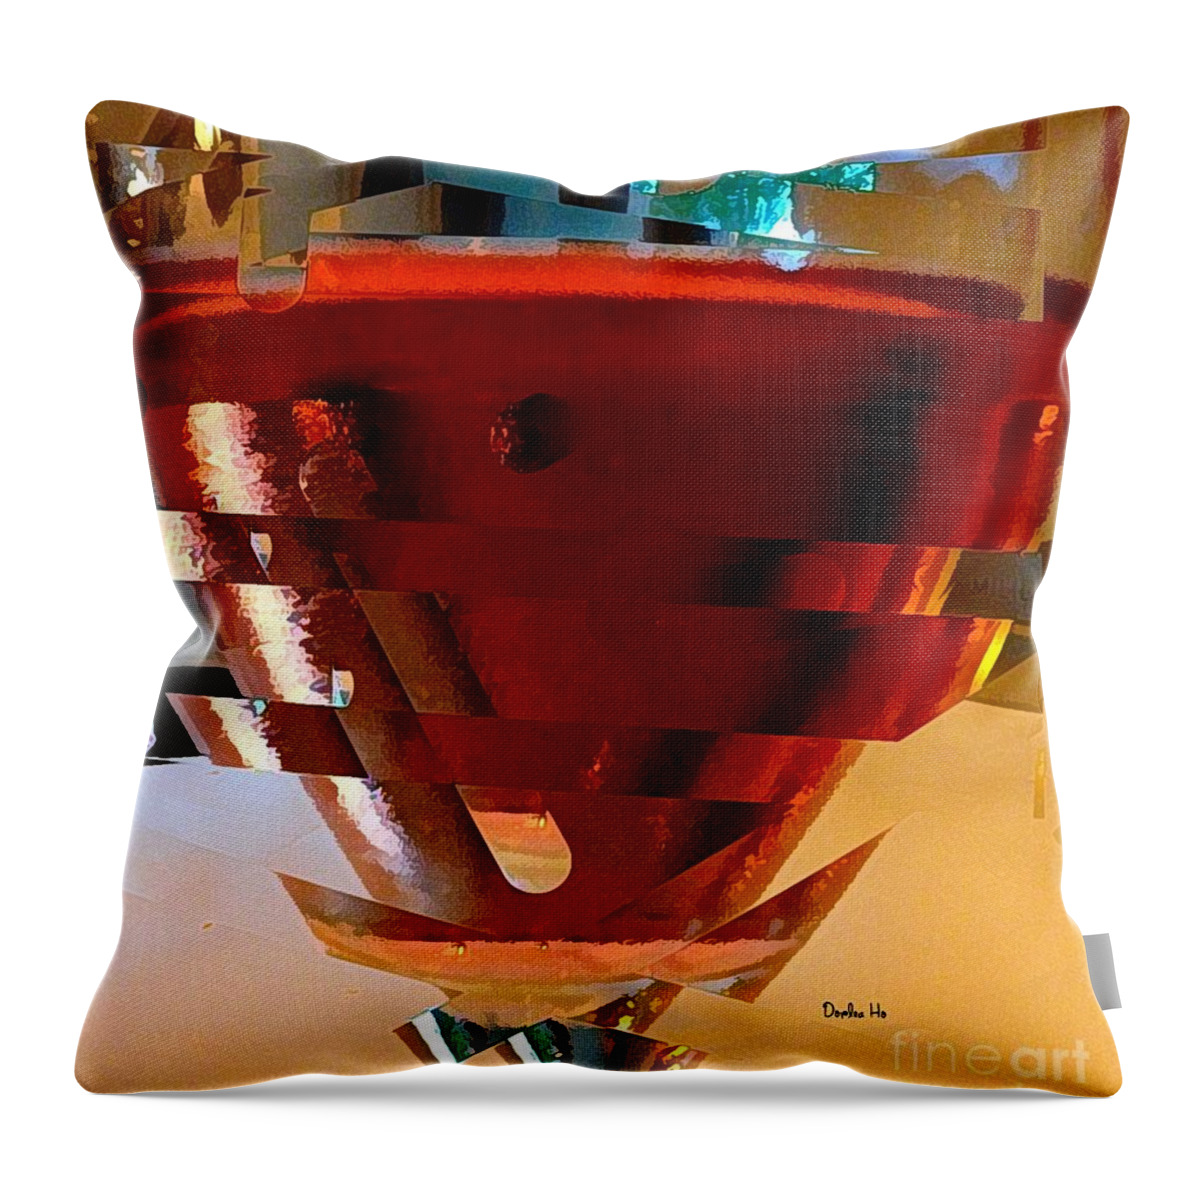 Hawaii Throw Pillow featuring the digital art Twisted Wine Glass by Dorlea Ho